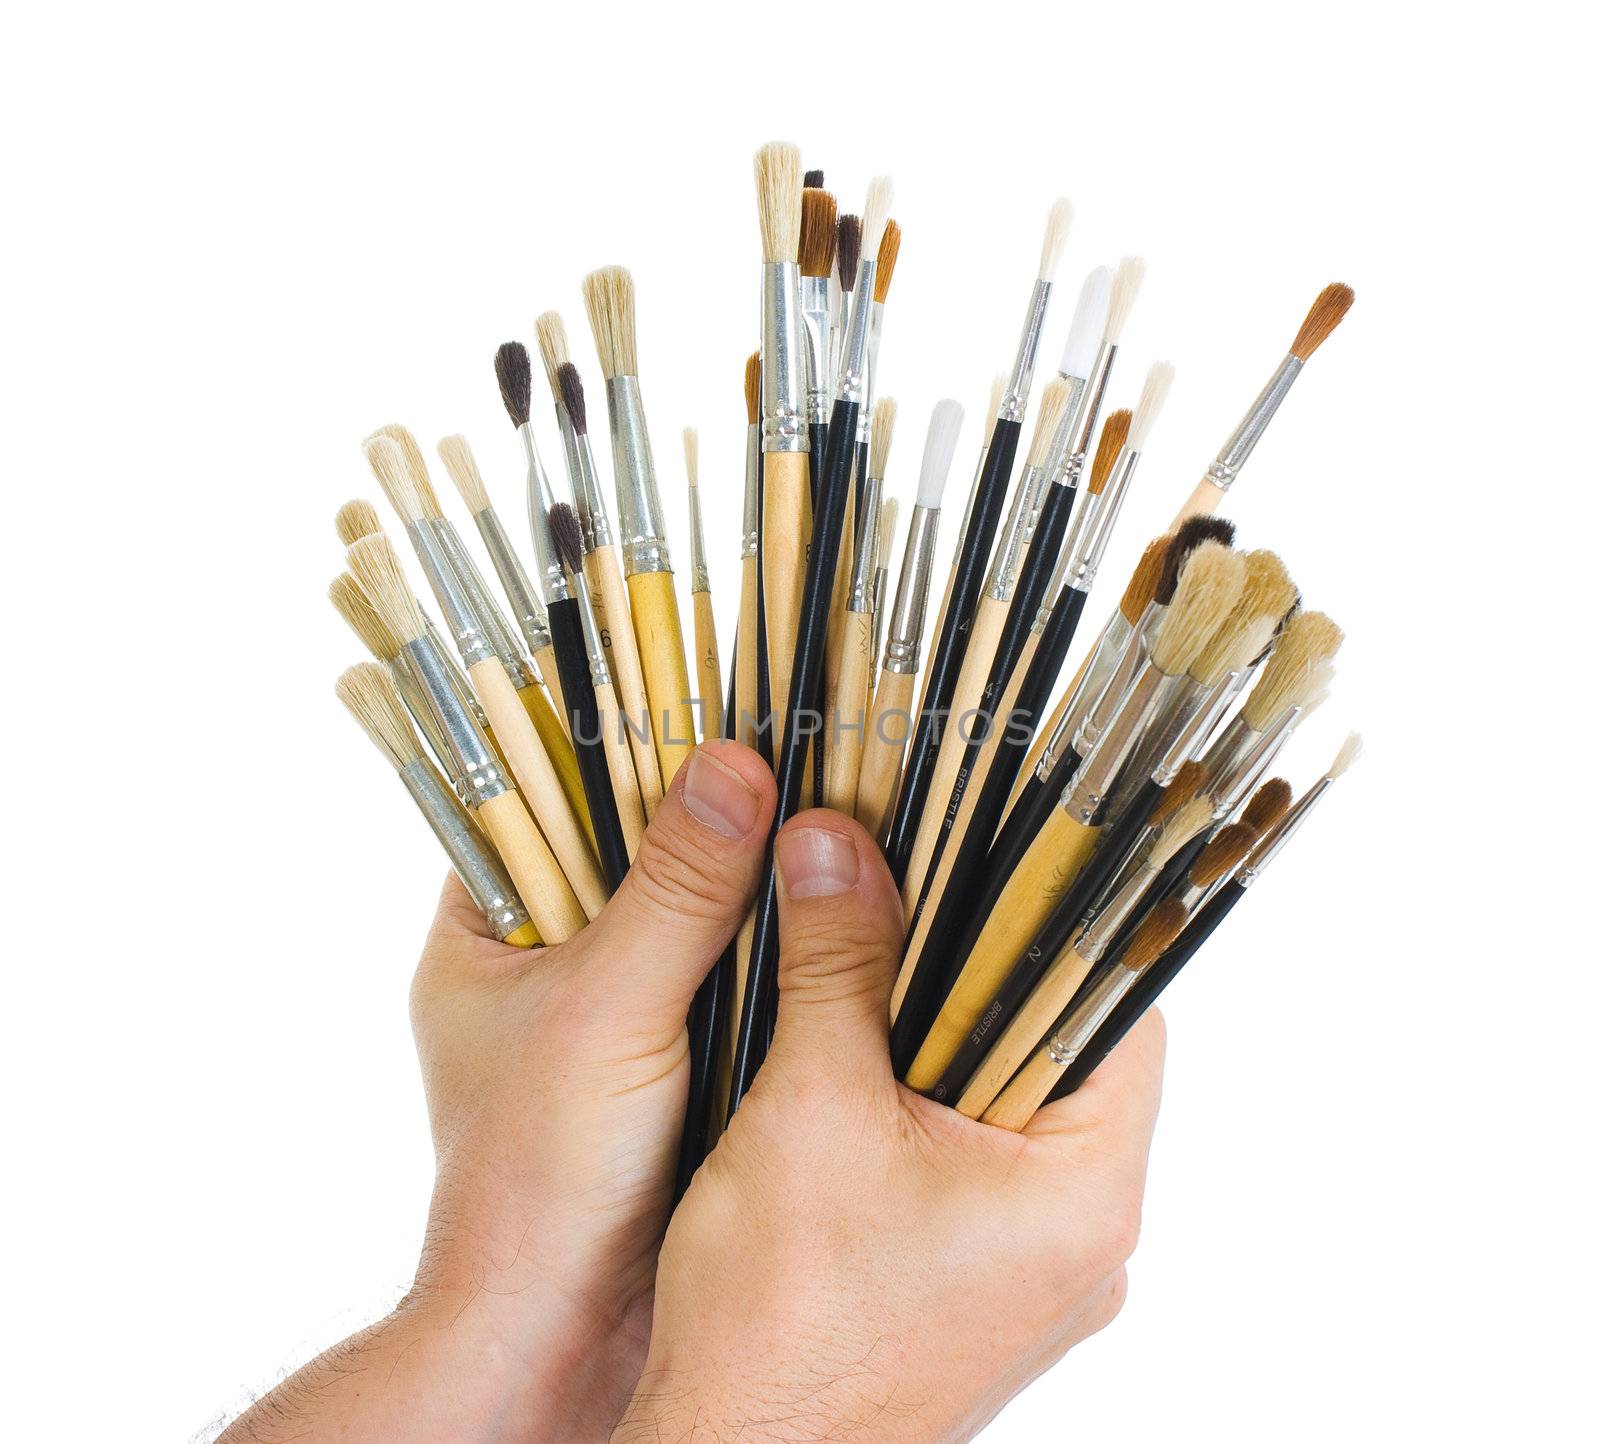 Brushes in hand isolated on white background